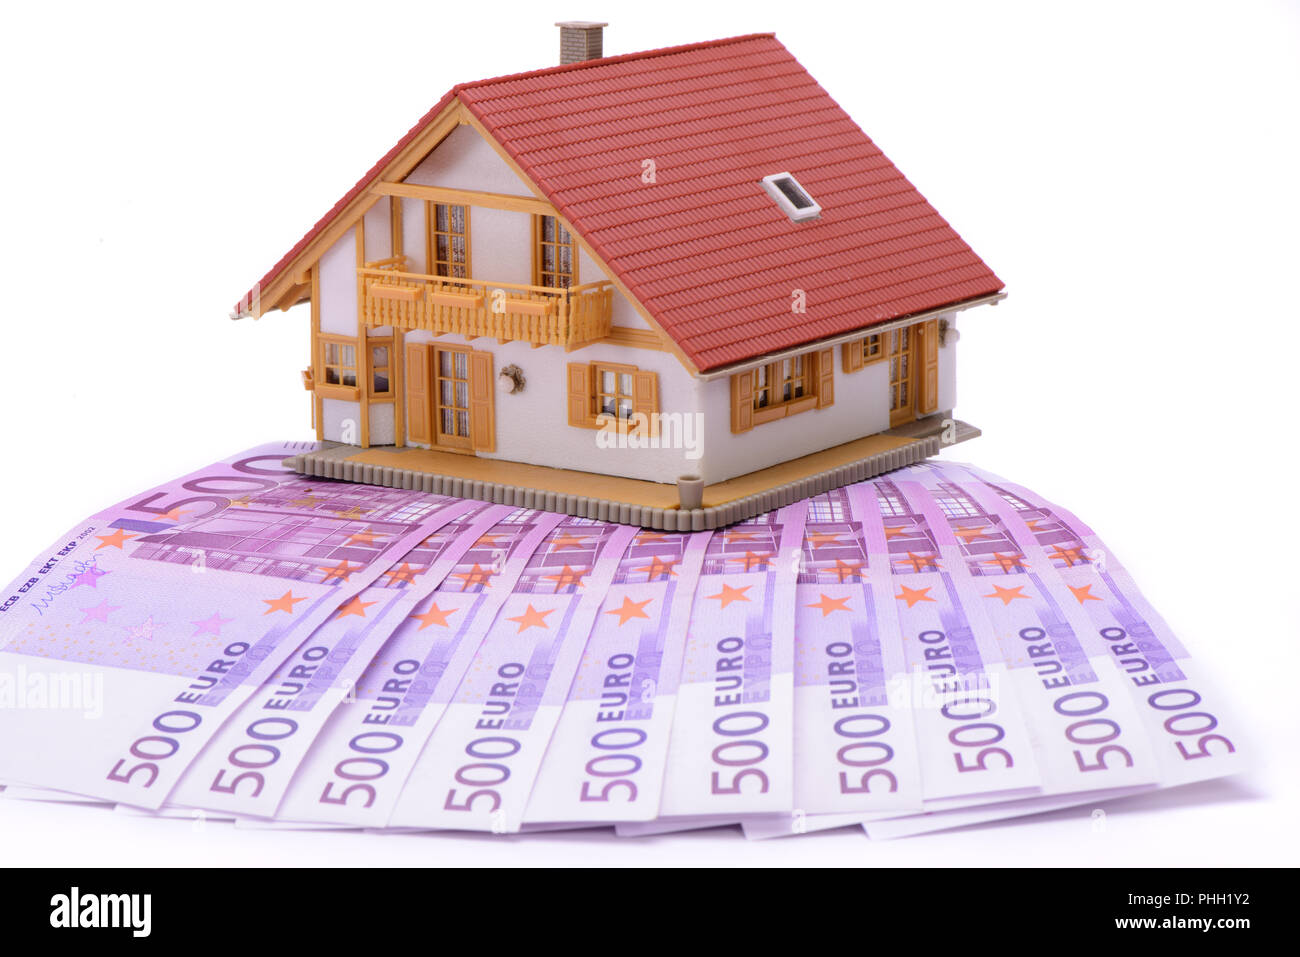 house for sale with Euro banknotes Stock Photo